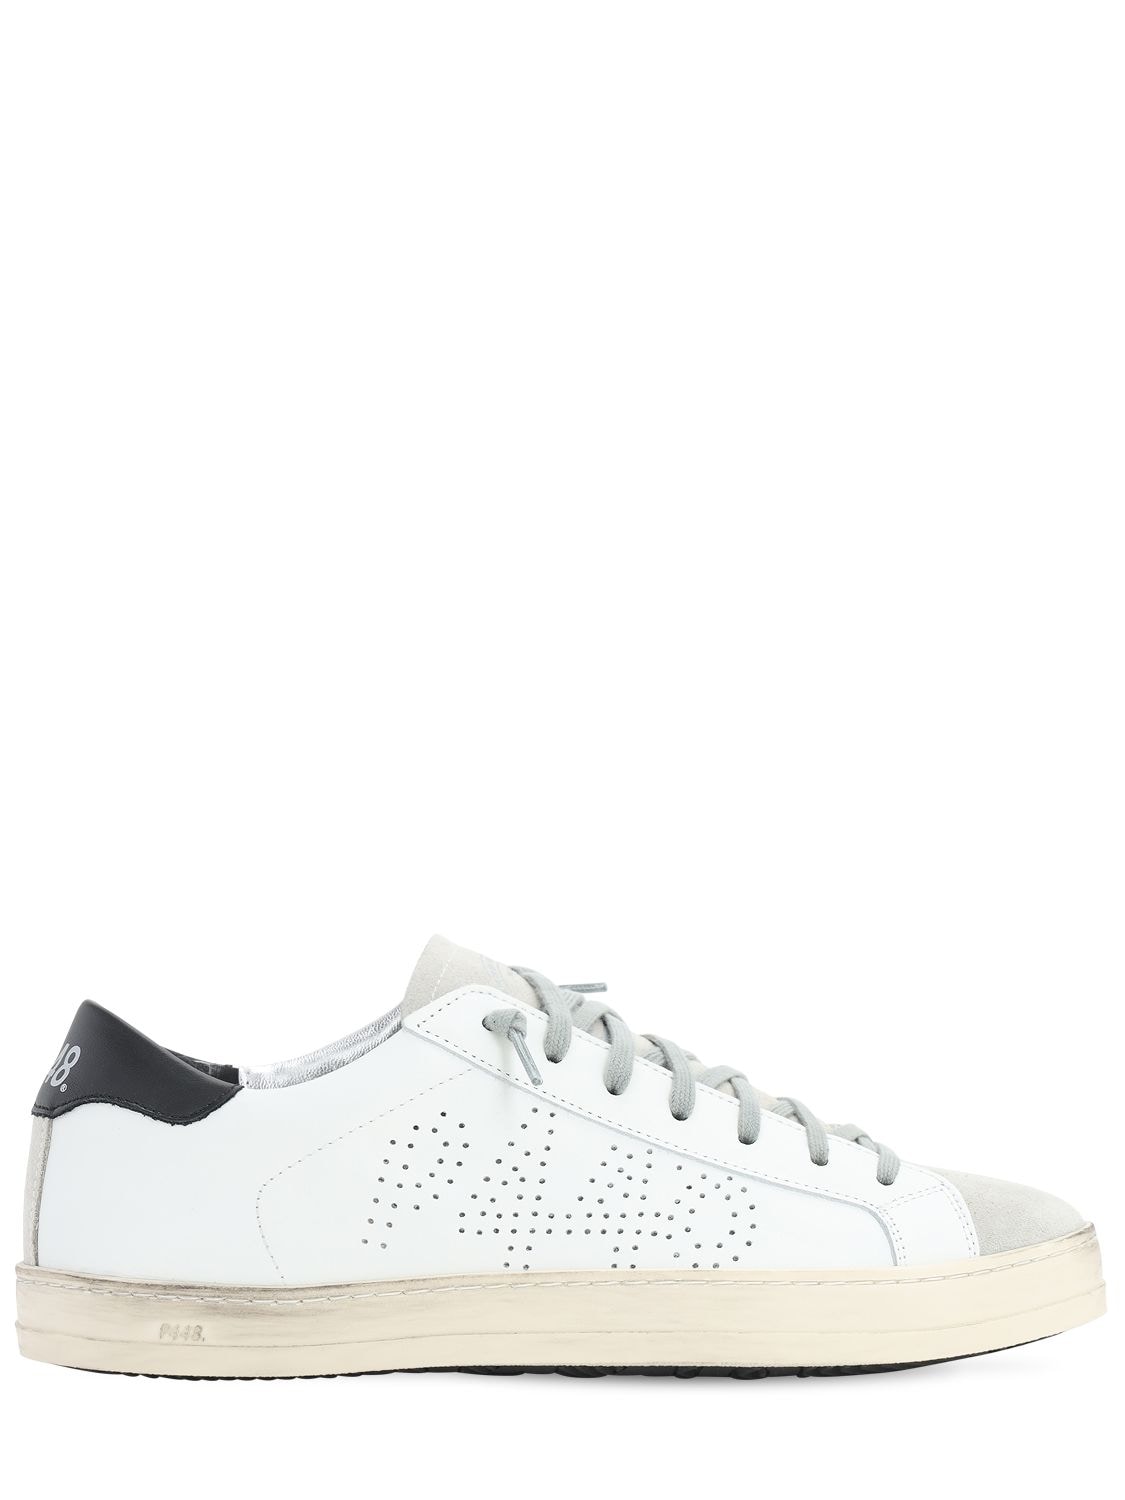 P448 John Leather & Suede Low-top Sneakers In White,black | ModeSens